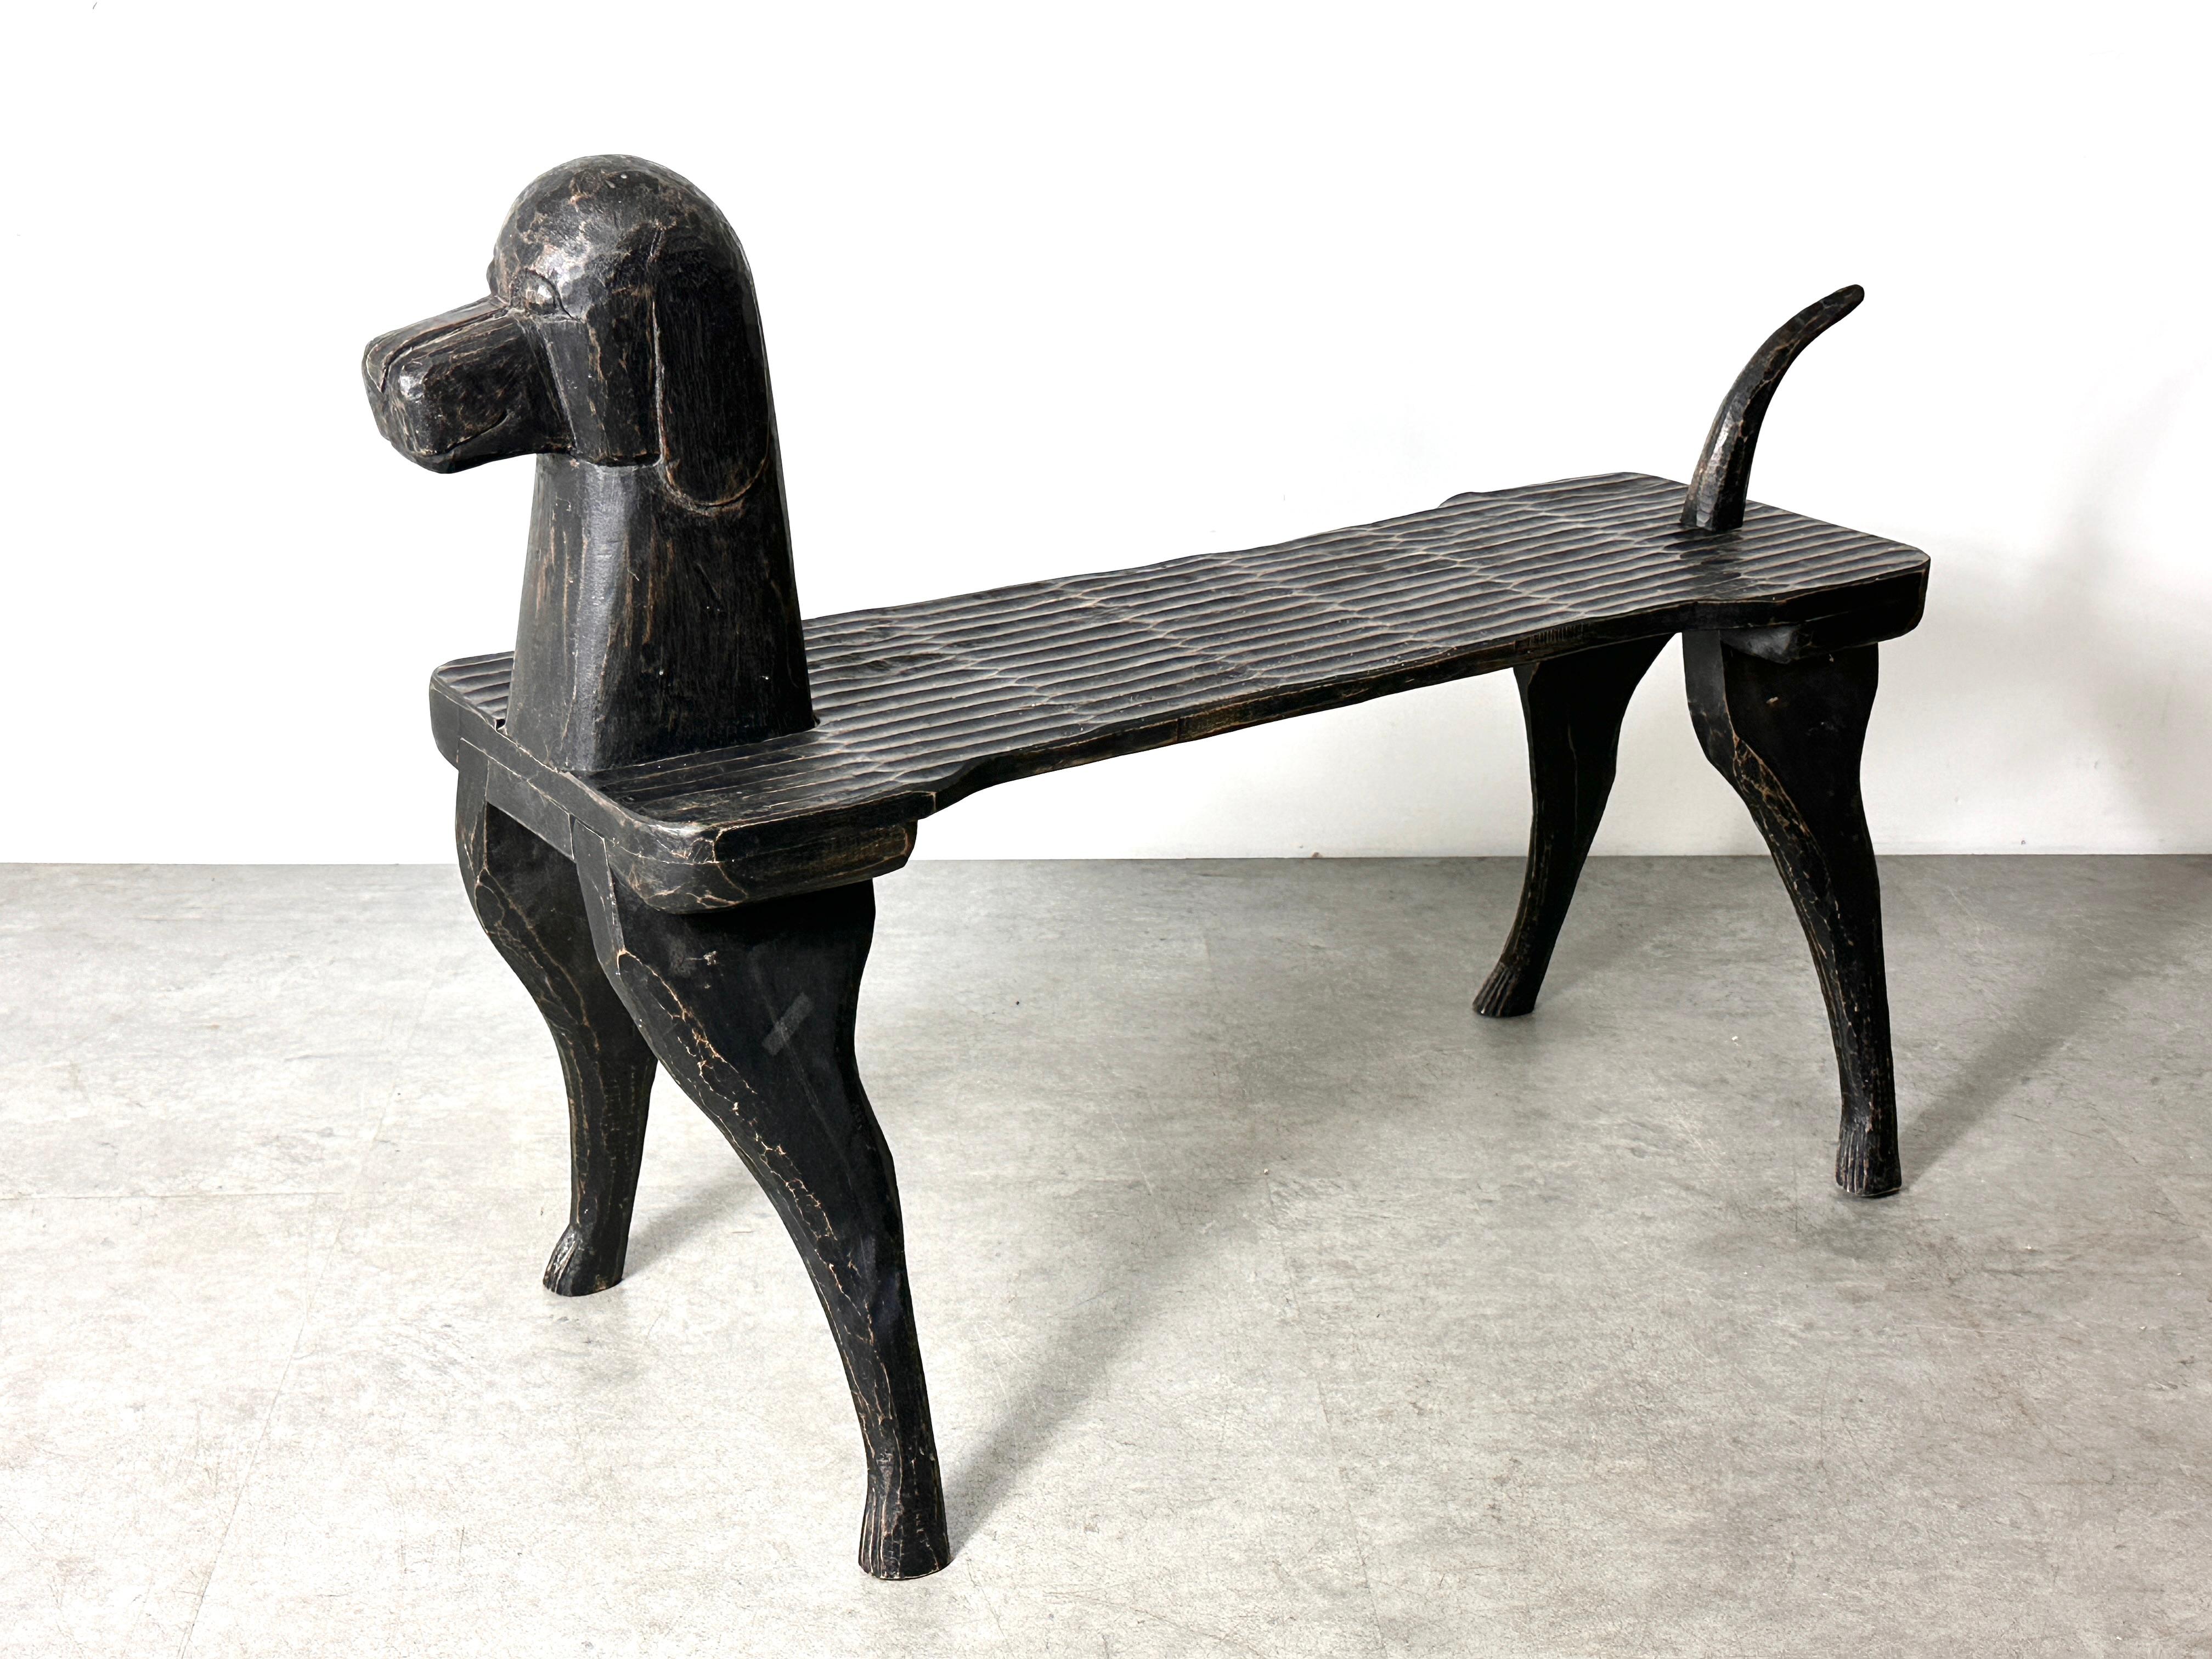 Sculptural carved wood dog form bench attributed to Steven Huneck circa 1990s
Post modern design in solid wood with carved details and distressed finish 
